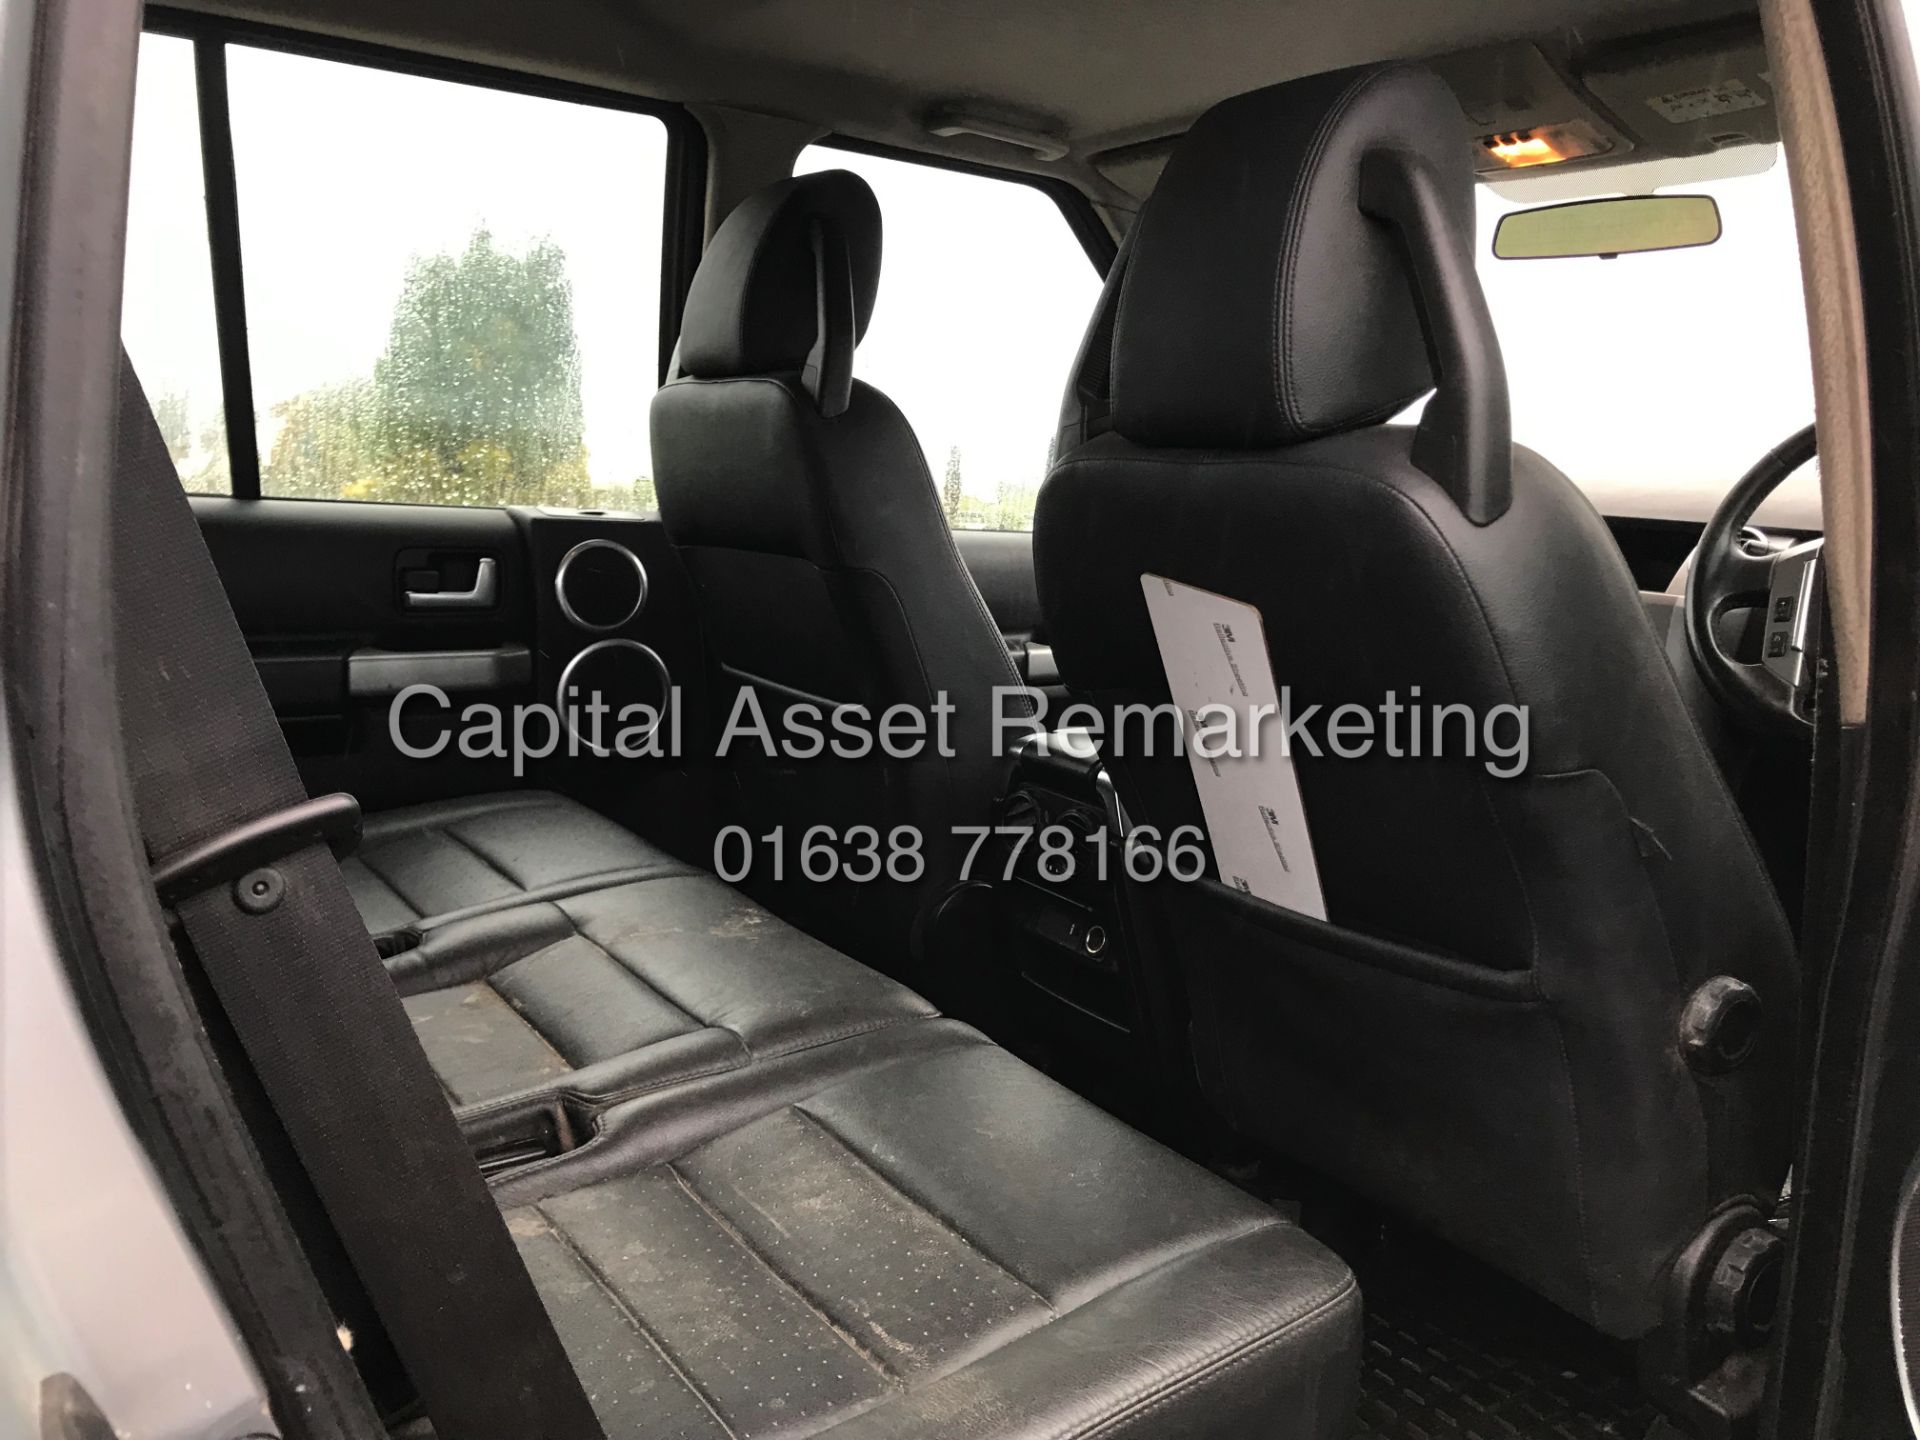 (ON SALE) LANDROVER DISCOVERY 3 "TDV6 2.7 AUTO - 59 REG - LEATHER - GREAT SPEC - 7 SEATER - WOW!!! - Image 12 of 17